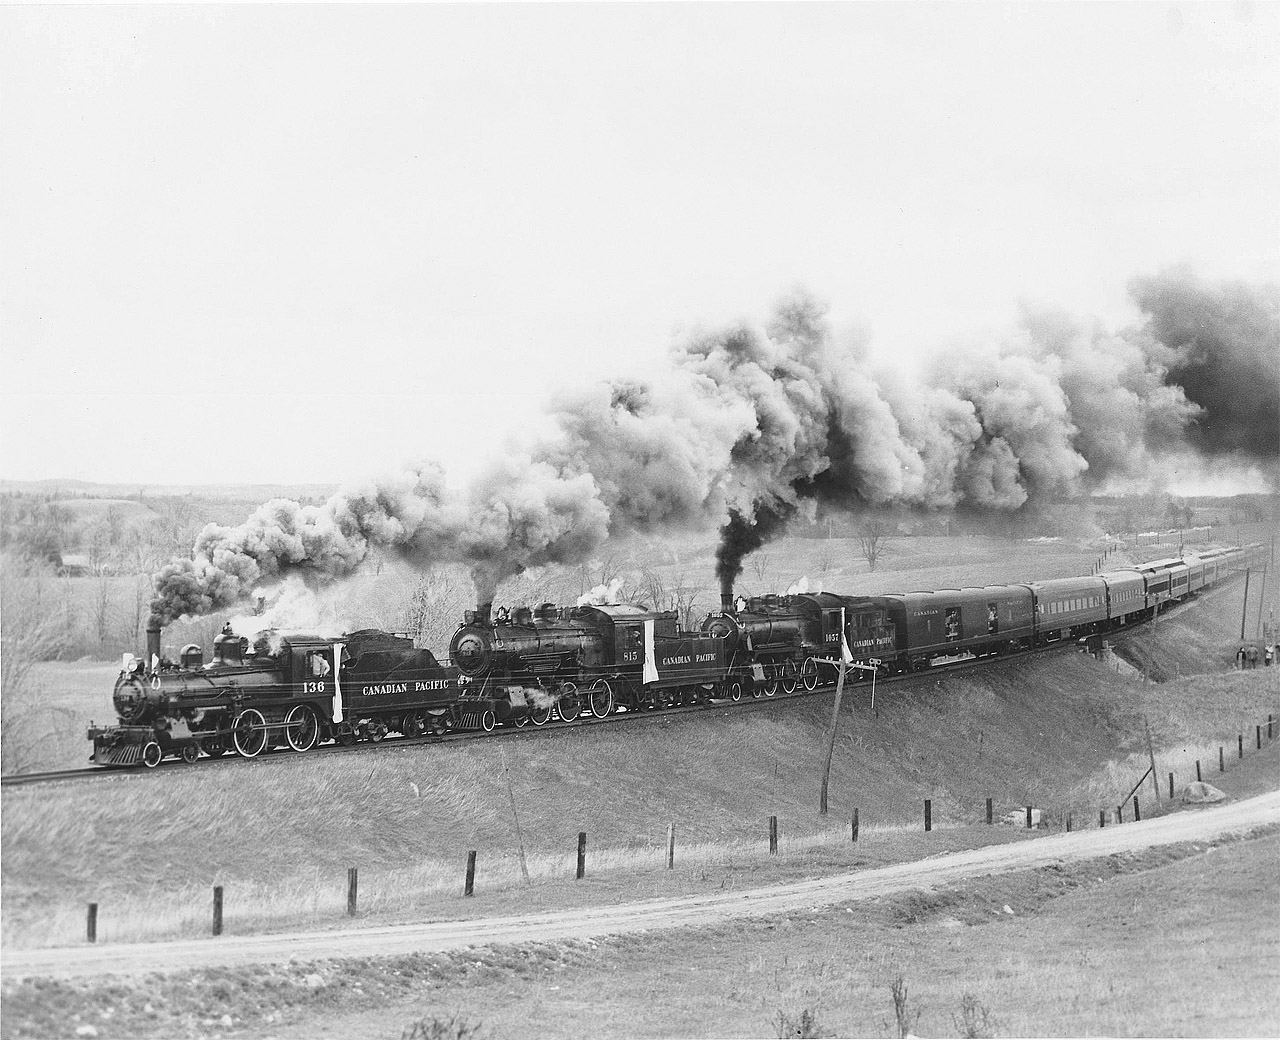 This photograph of the train running through open countryside shows the entire train of three locomotives and 14 cars! A quarter mile long and nearly 1000 tons.  The lightweight baggage car with electric generator for tape recorders and gated doorways typical for railfan excursions as well as food and drink supplies for the vendors who went though the cars.  Two lightweight air conditioned coaches with reclining seats are next. Two more were substituted for higher seating capacity heavyweight coaches more typical for a train of the steam era.  Even more seating would have been of benefit to the hundreds of people turned away. It would however have spoiled the appearance of the train so I stopped there.  Two ancient wooden coaches (1595 and 1596) brought up the tailend to represent earlier years.  These cars were brought to Toronto from The Glen Yard in Montreal along with a spare protect coach 1583.  A dining car was placed in the train to provide full meal service complete with a special souvenir menu.  The CPR wanted to add a second dining car to handle the anticipated demand however; they wanted to reduce a coach stating they didn’t feel the engines could not handle 15 cars. I refused because the loss of about 80 tickets would have meant the loss of any profit.  This was a very expensive event.   Had a third D10 (1087) been used the second diner and perhaps another coach could have been handled however the 136 was already committed to.  Besides, it would not have been the big drawing card without the little 4-4-0. 

Note the new white canvas curtains applied to the engines as the CPR went all out dressing up the engines in passenger special trim including white tyres, silver armoured cable to head and class lights as well as builders plates. Red paint inside the bells!  Even new bell ropes.  Engines and tenders were cleaned and painted, cab interiors painted CPR standard green with red trim. Too much paint in fact.  All the valves etc. were freshly repainted black BUT the CPR wanted Passenger Special trim which meant polished brass everywhere! I recall checking on the engines a day or two in advance at Lambton roundhouse where I worked and found a labourer with a big file hand filing the fresh paint off the brass valve nuts! What a job!  I quickly left the cab without saying anything before he blamed me! 

Raymond L. Kennedy CPR Retired